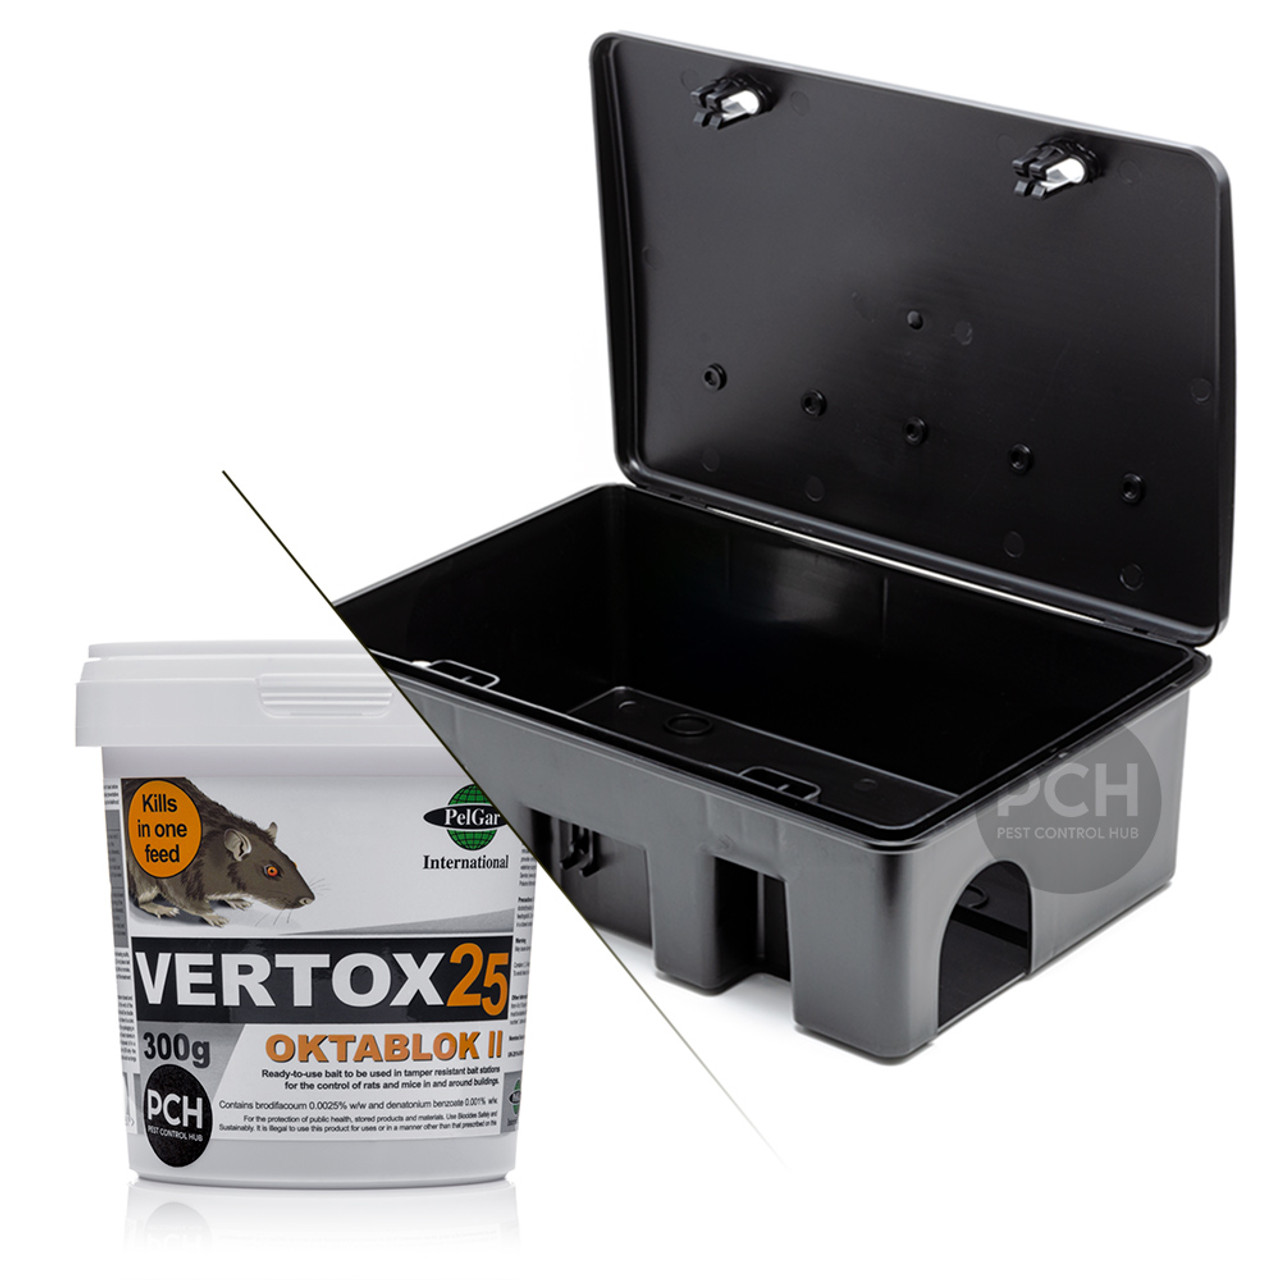 https://cdn11.bigcommerce.com/s-lmuttm1jiv/images/stencil/1280x1280/products/387/1323/Mastertrap-MX-Rat-and-Mouse-Bait-Station-Box-with-Vertox25-All-Weather-Poison-Blocks-1-Station-_-1-Pack-Vertox25__07198.1590440932.jpg?c=2?imbypass=on